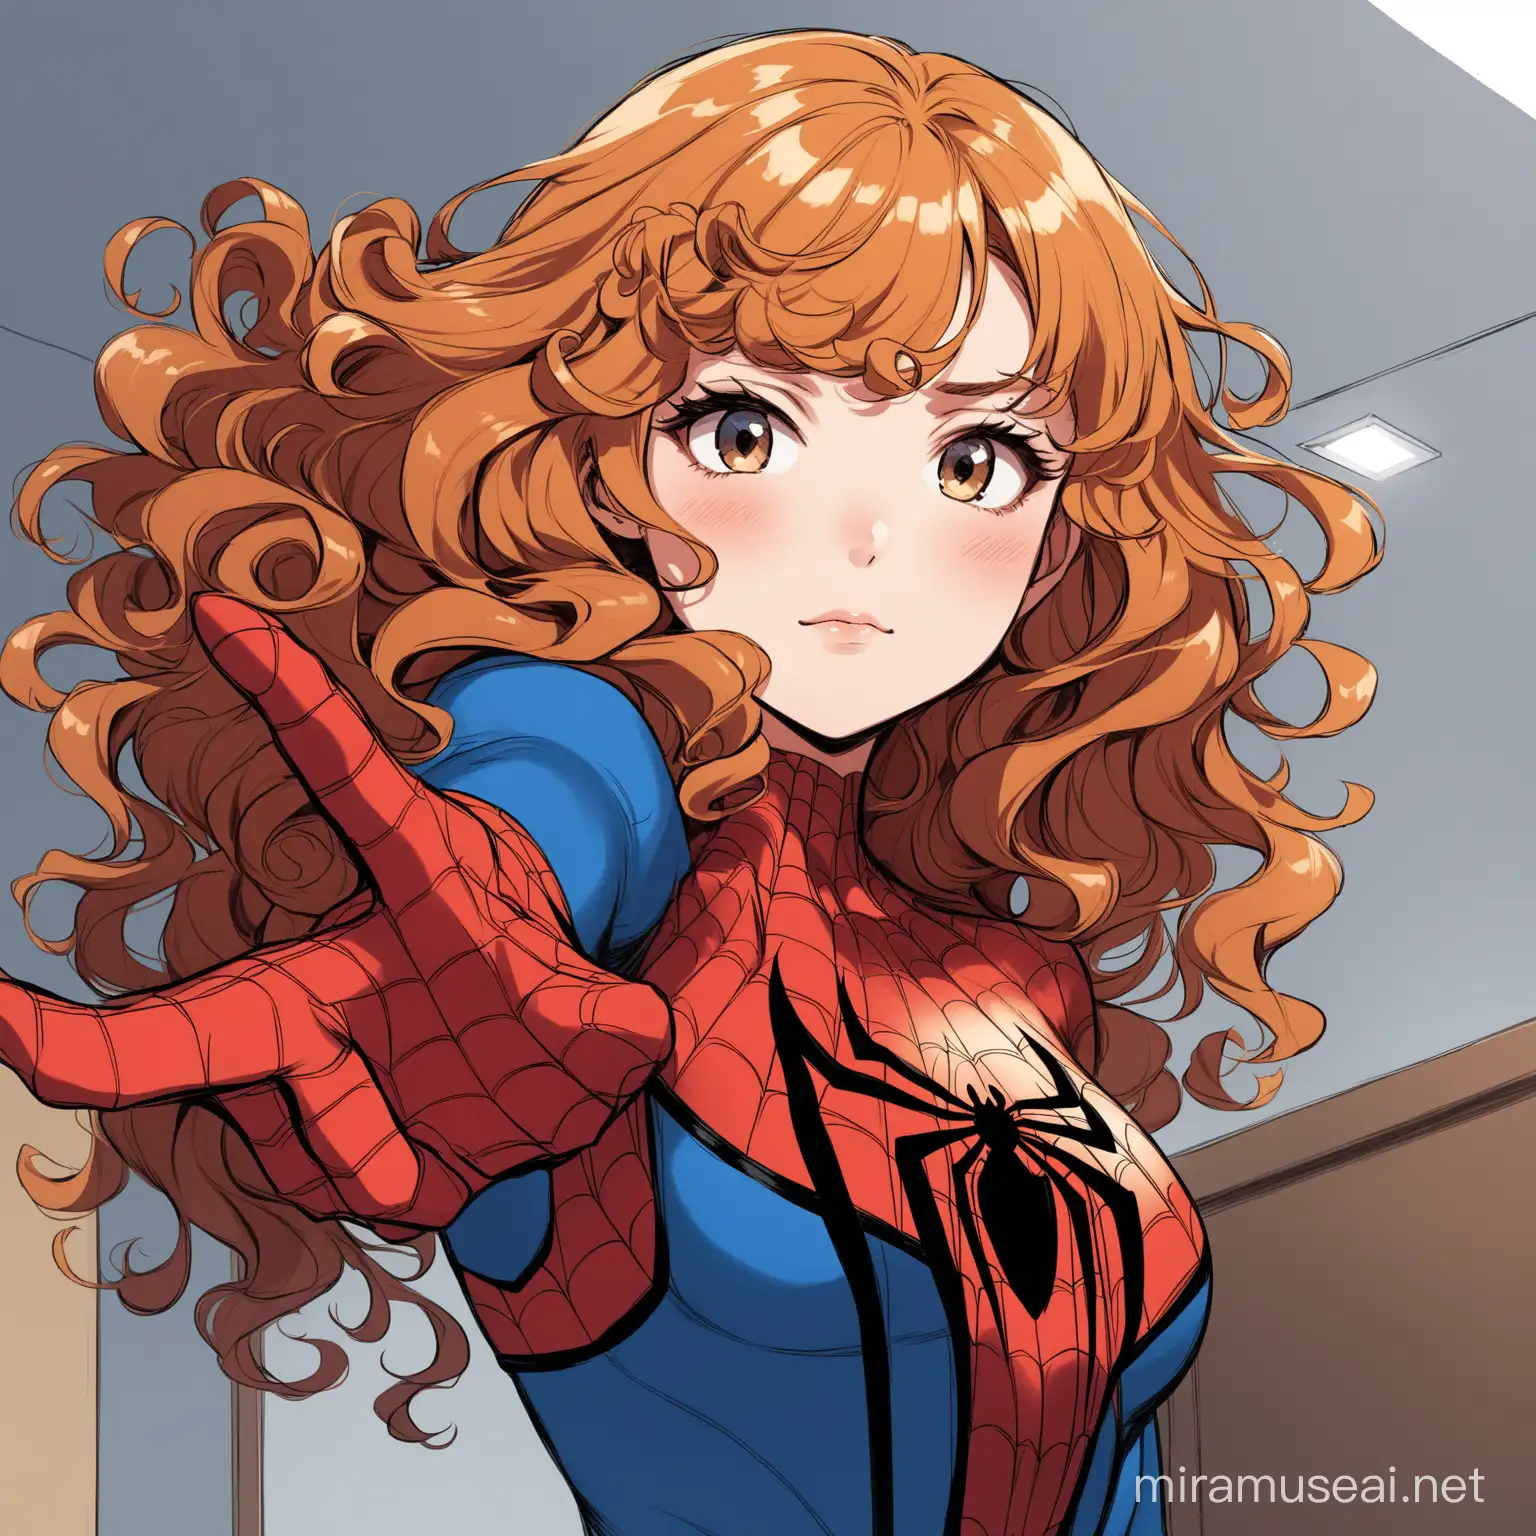 Curlyhaired Girl Rescued by SpiderMan in Daring Urban Adventure